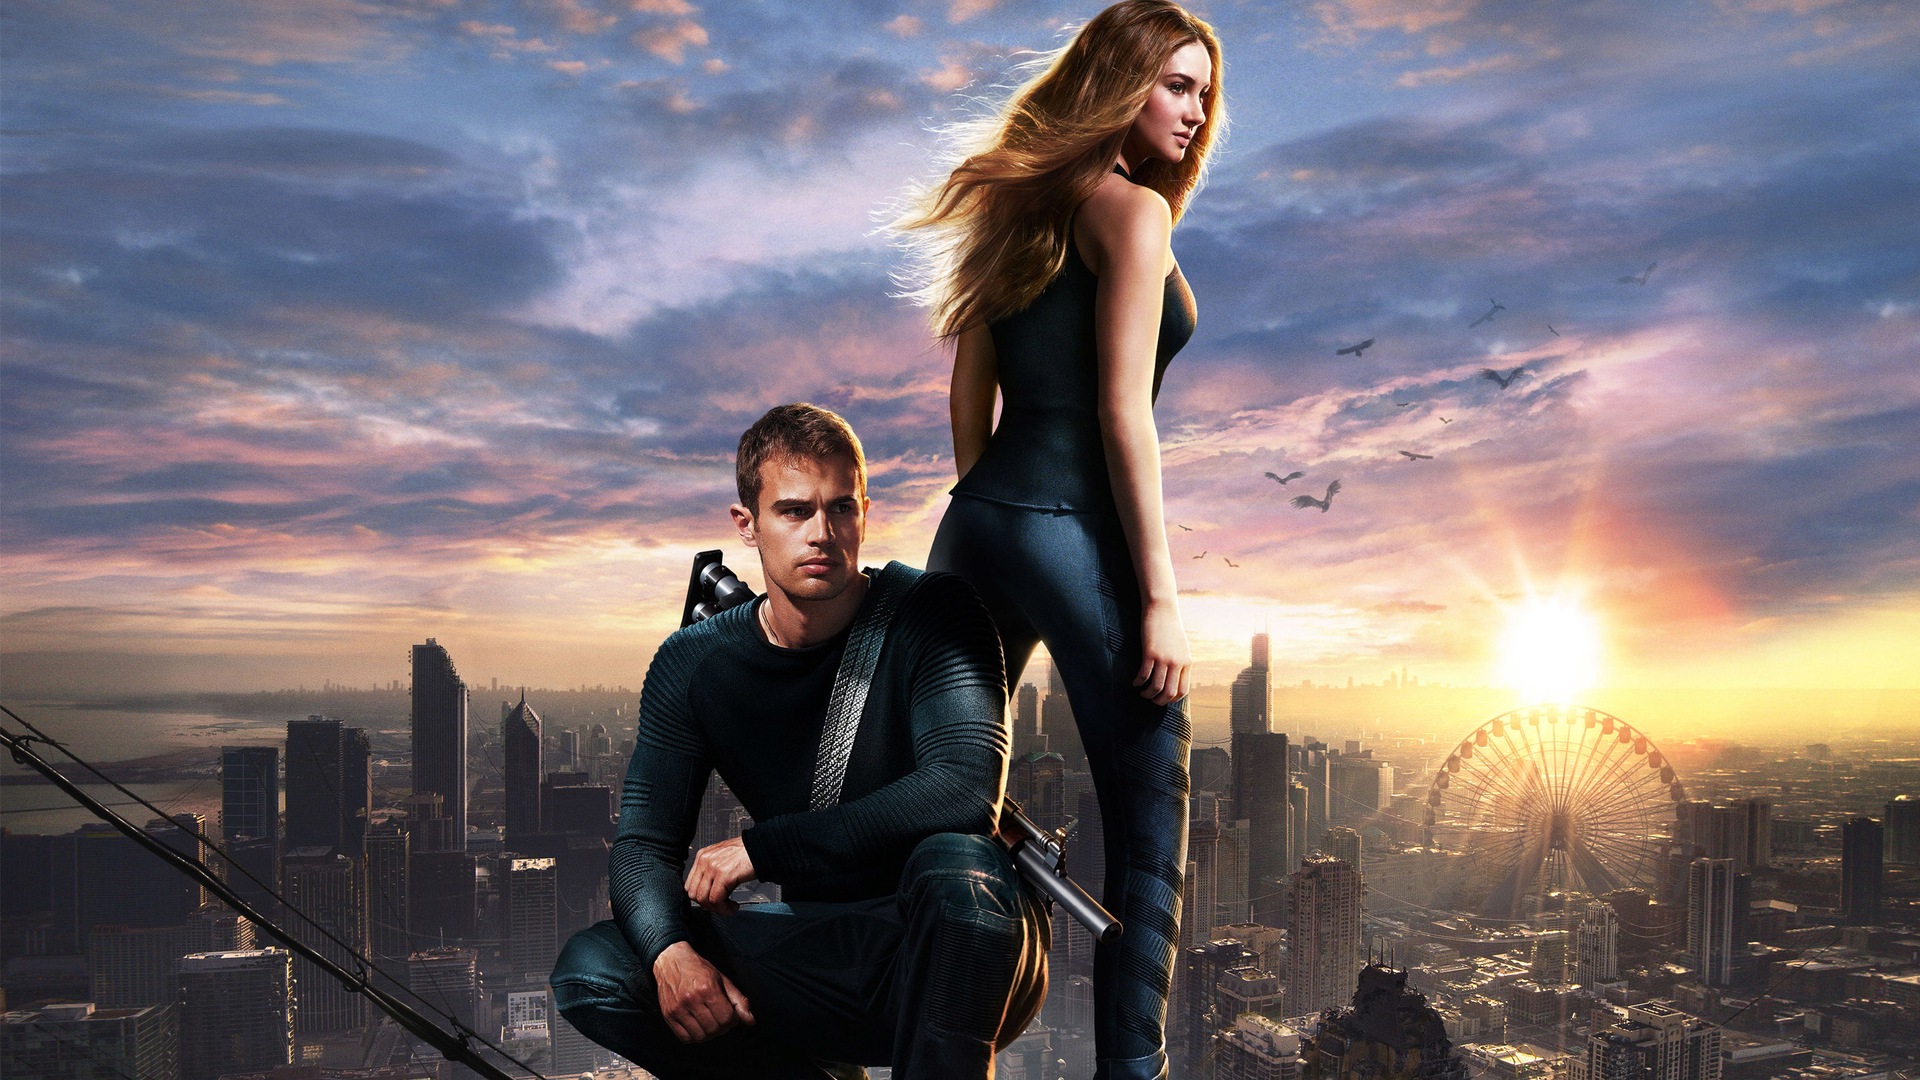 Divergent movie HD wallpapers #1 - 1920x1080